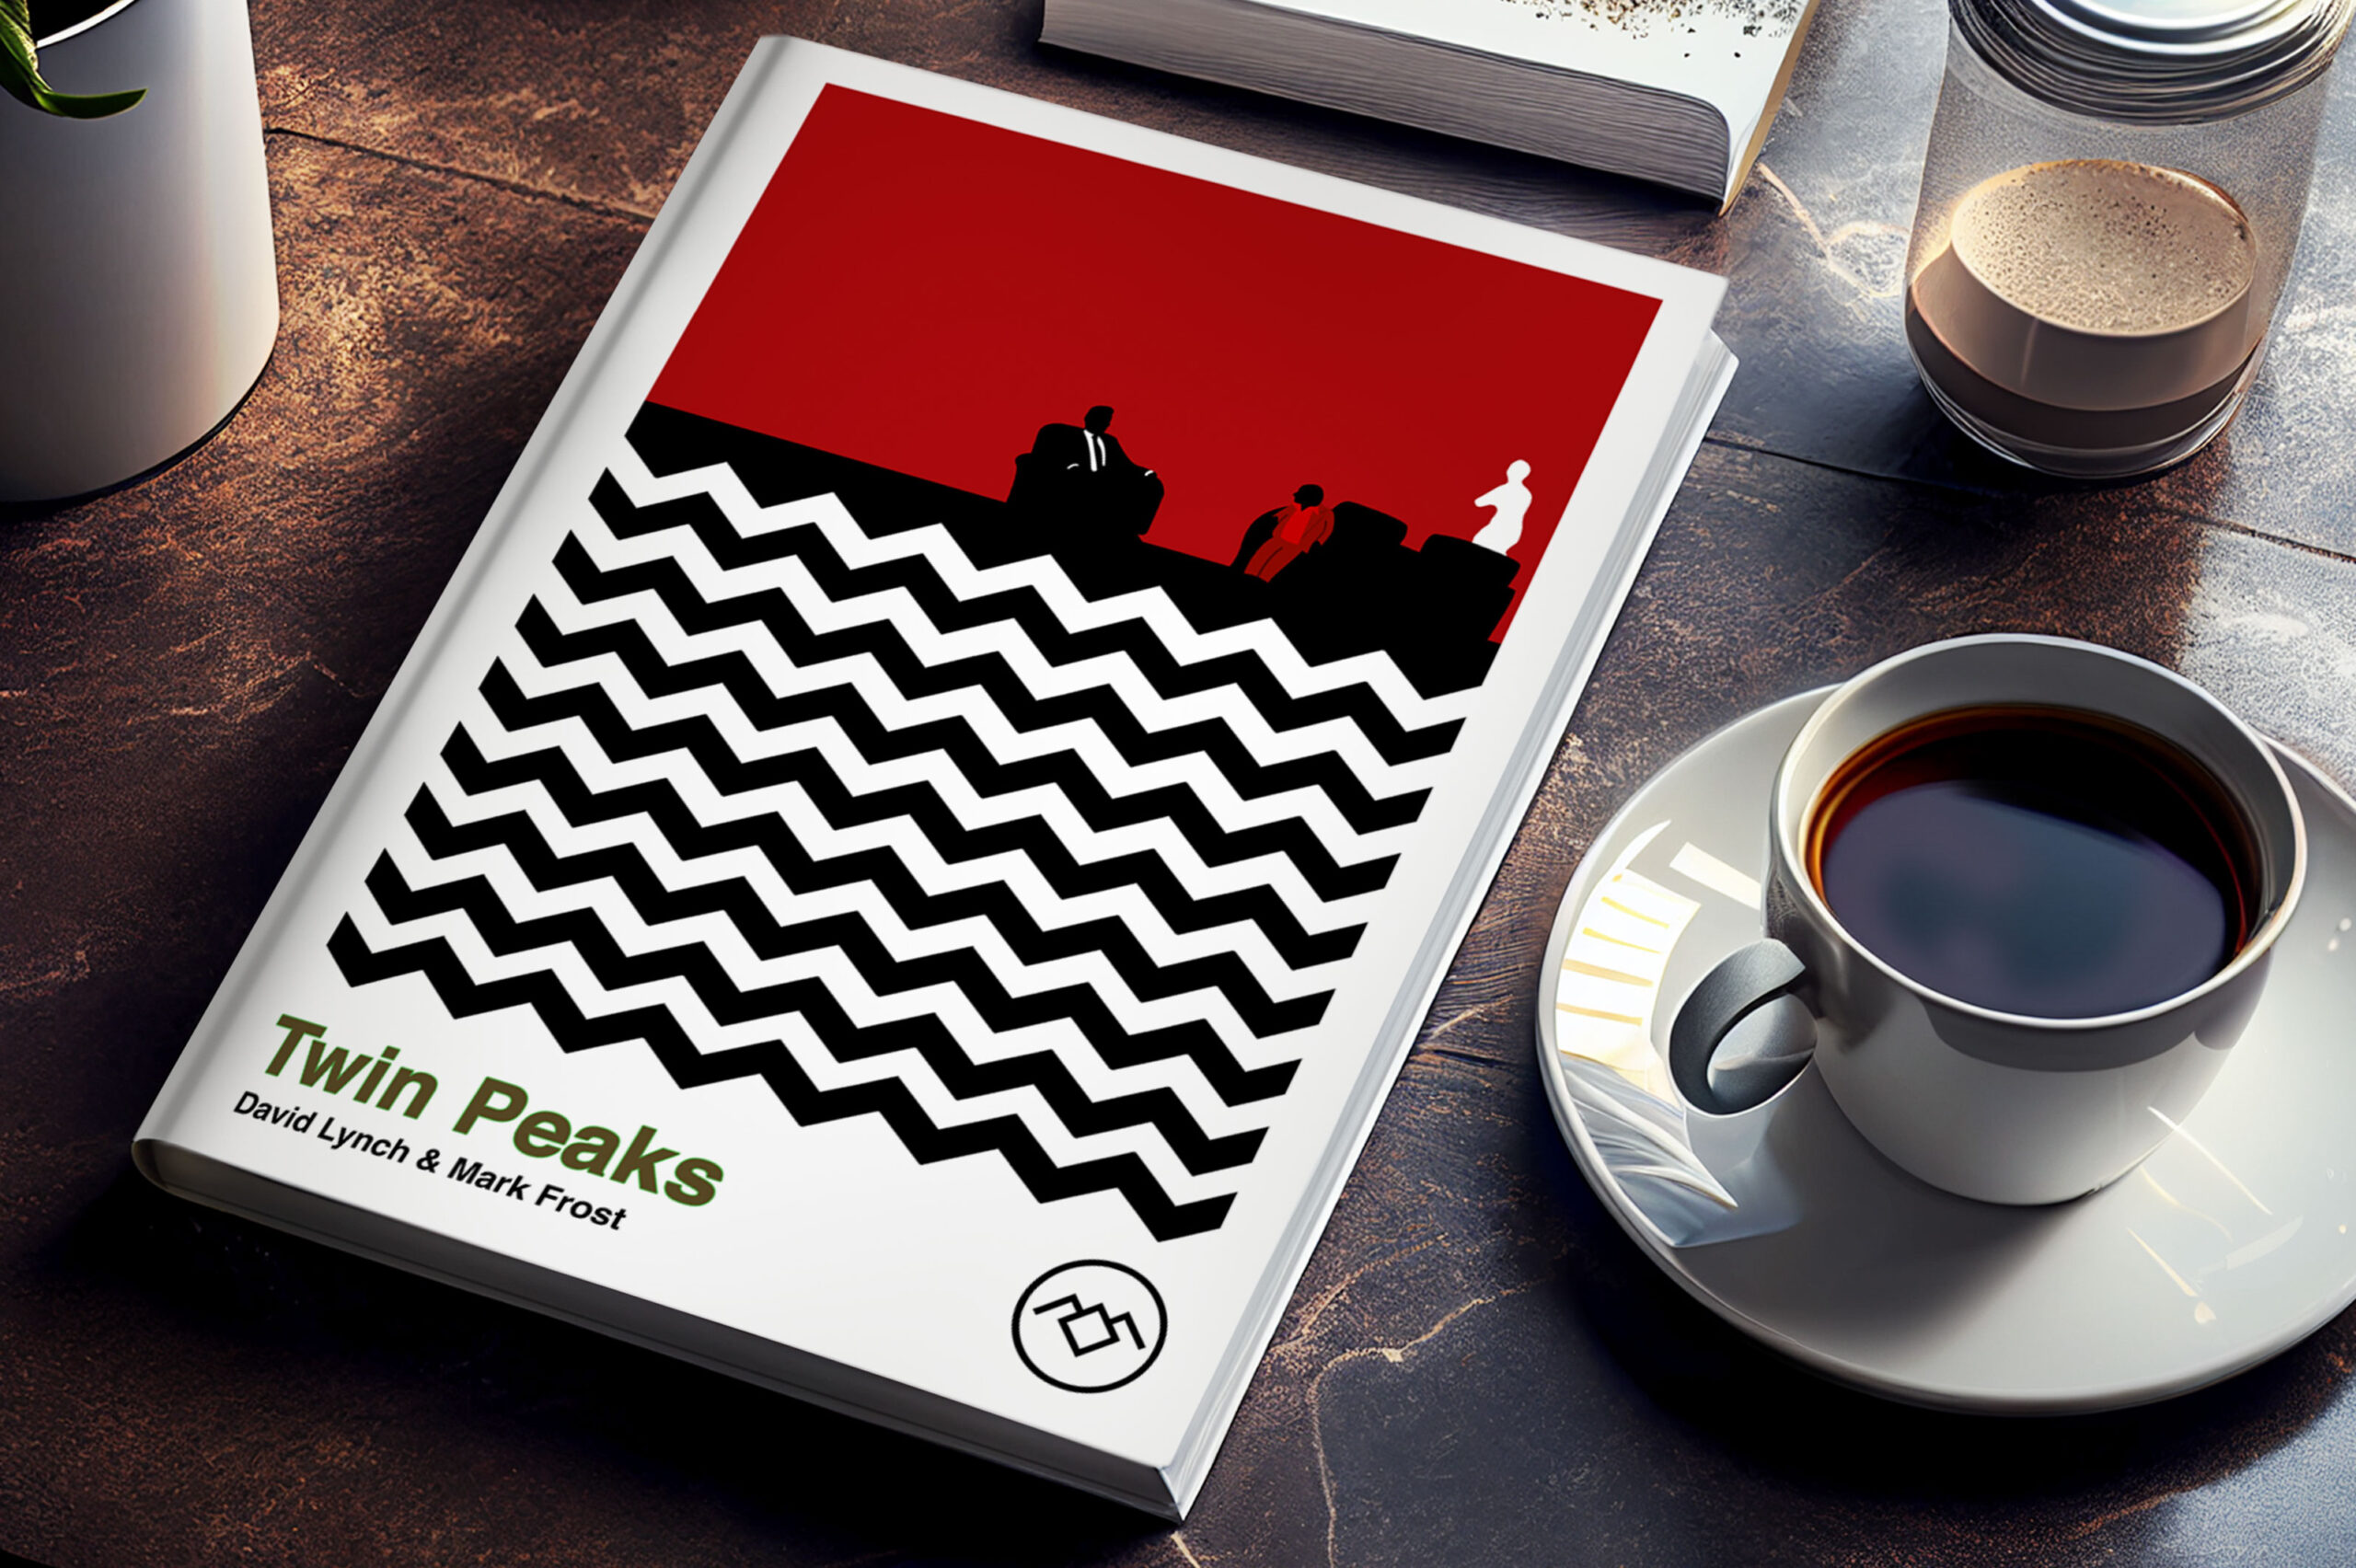 Book Cover Design Inspired by Twin Peaks featuring Kyle McLachlan a.k.a Dale Cooper.  Made by Jon Glanville - Plymouth Graphic Designer.